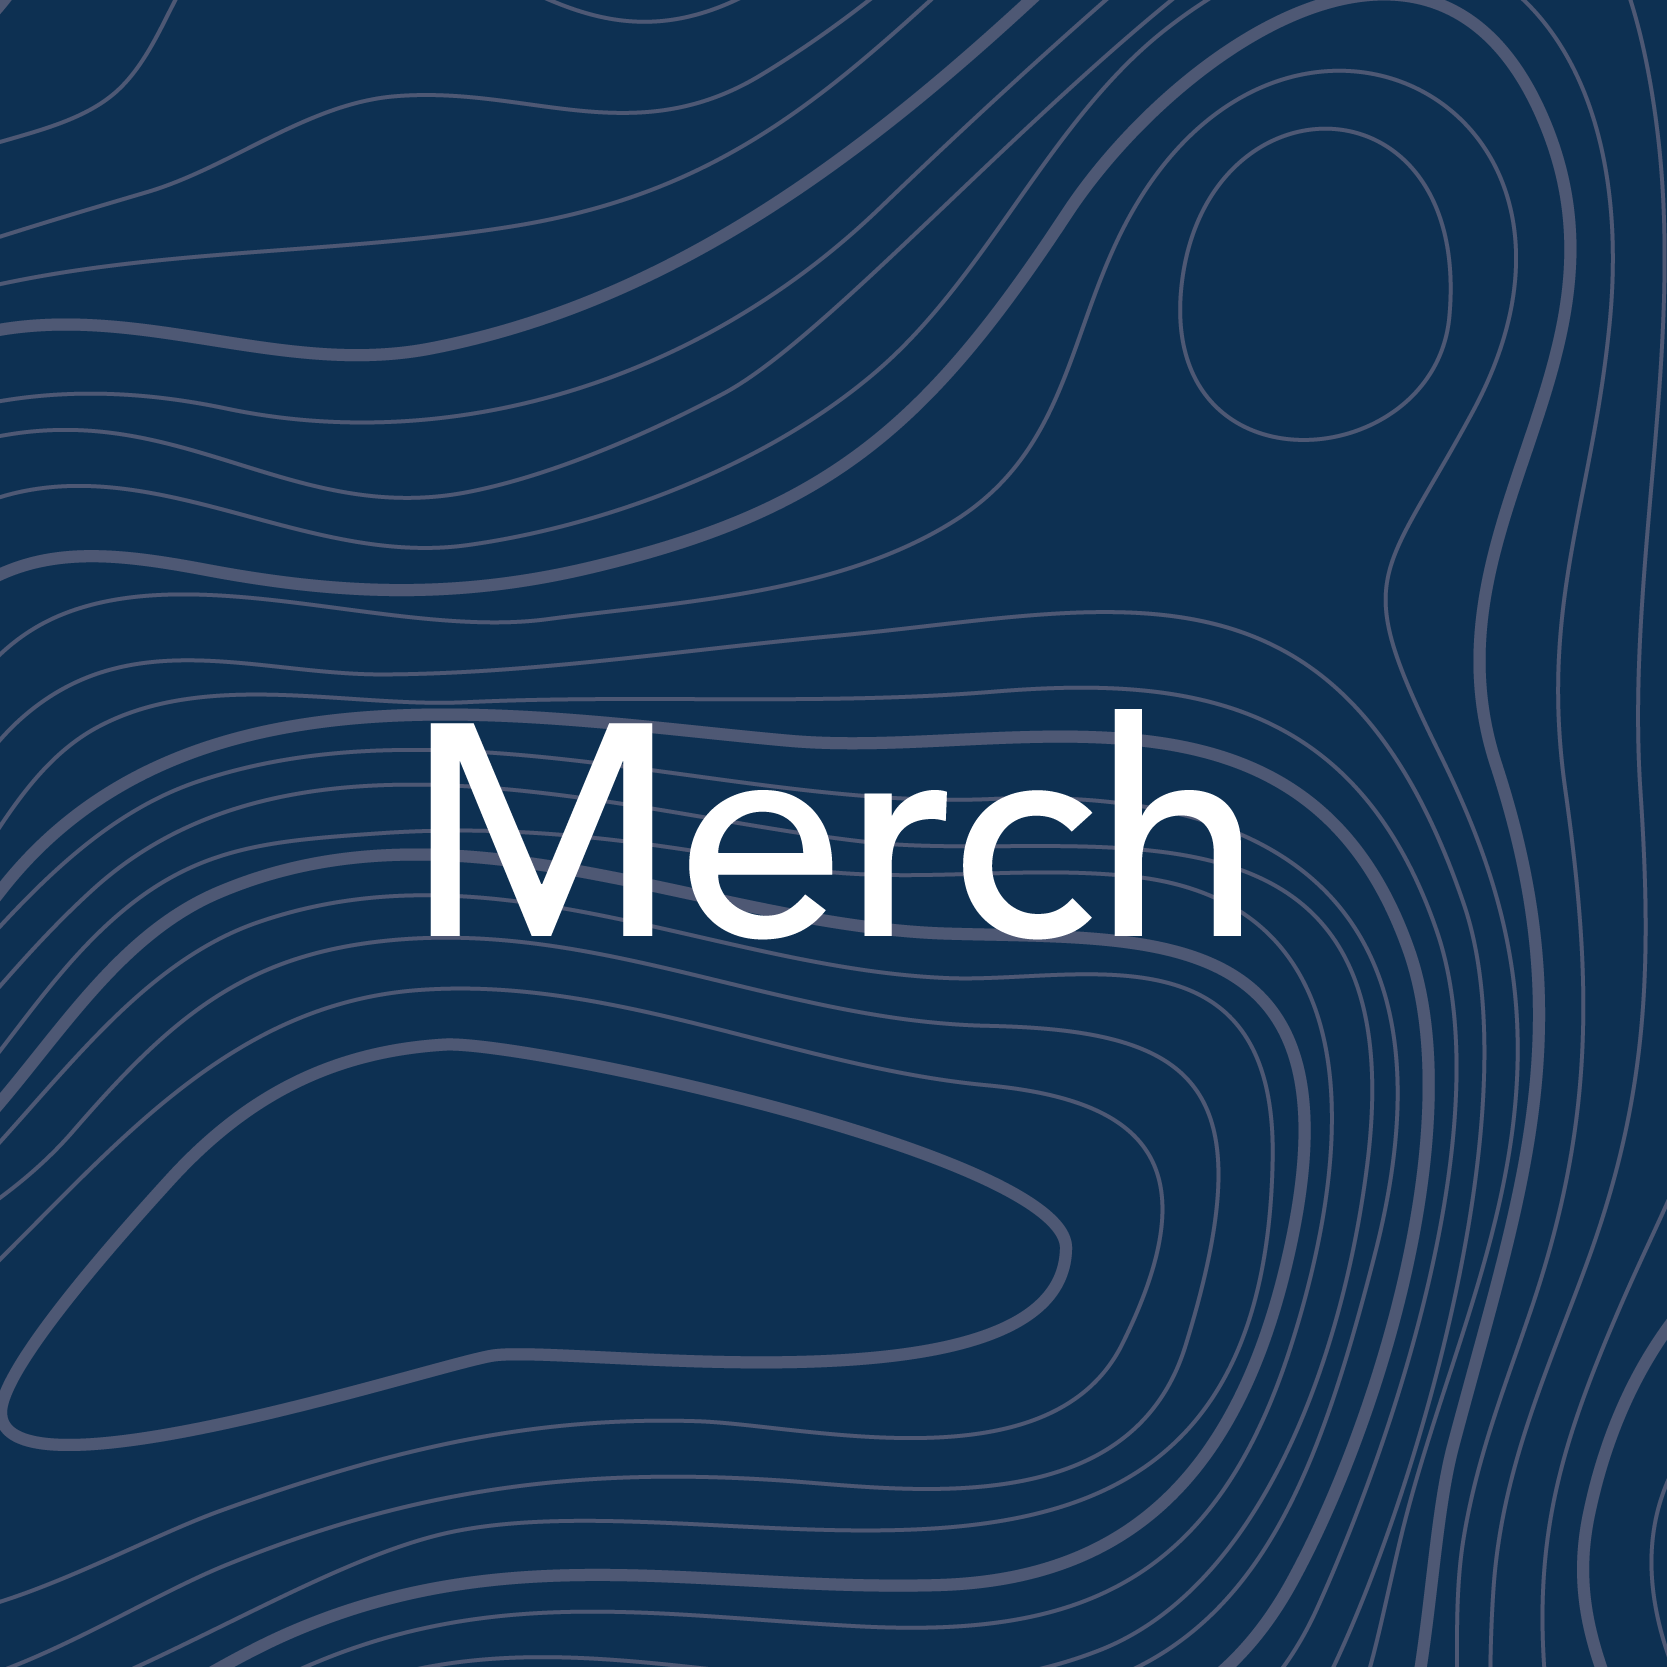 The word merch on a blue background.